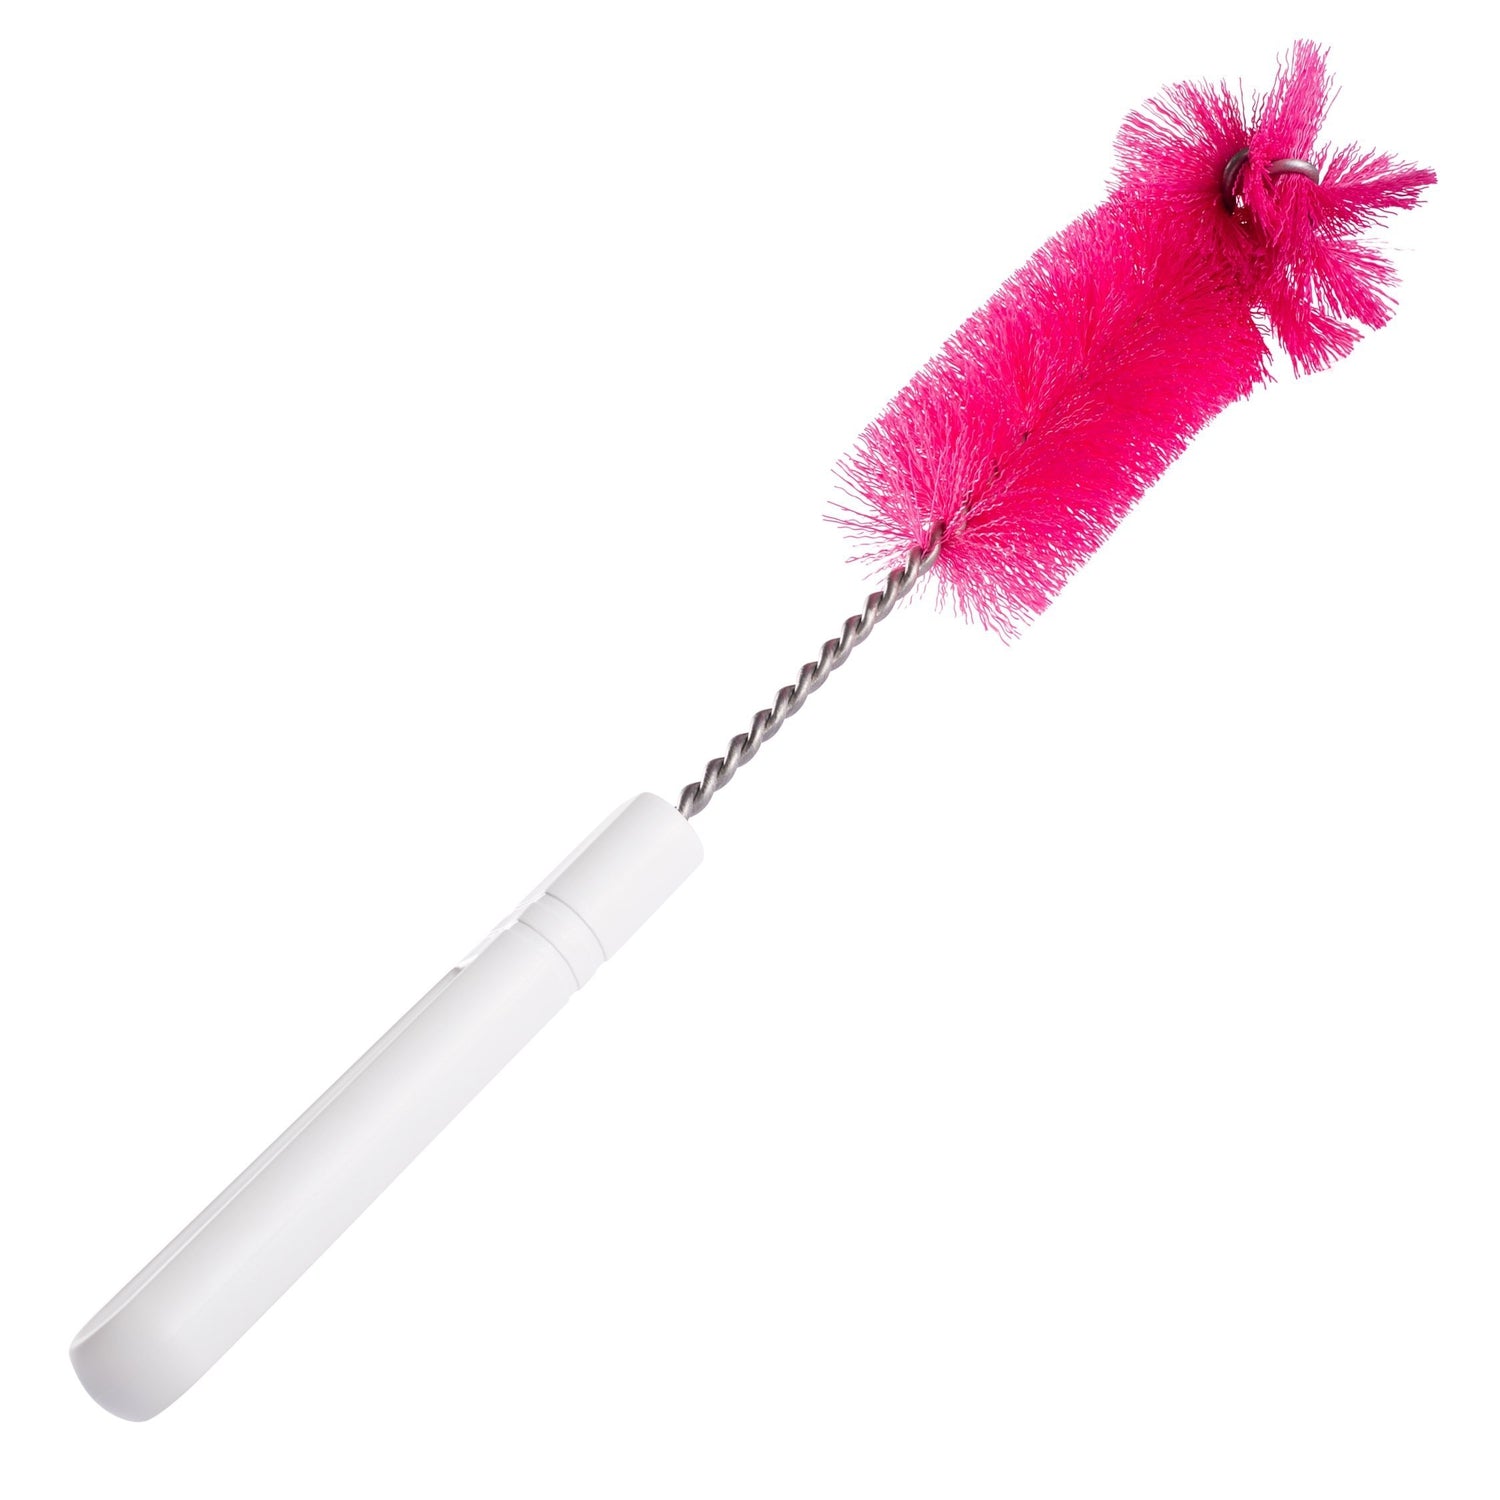 Pretty & Pink Sports Bottle Brush Perfect For Cleaning Sports and Drinking Bottles.-Cleaning Brushes-Fuller Brush Company